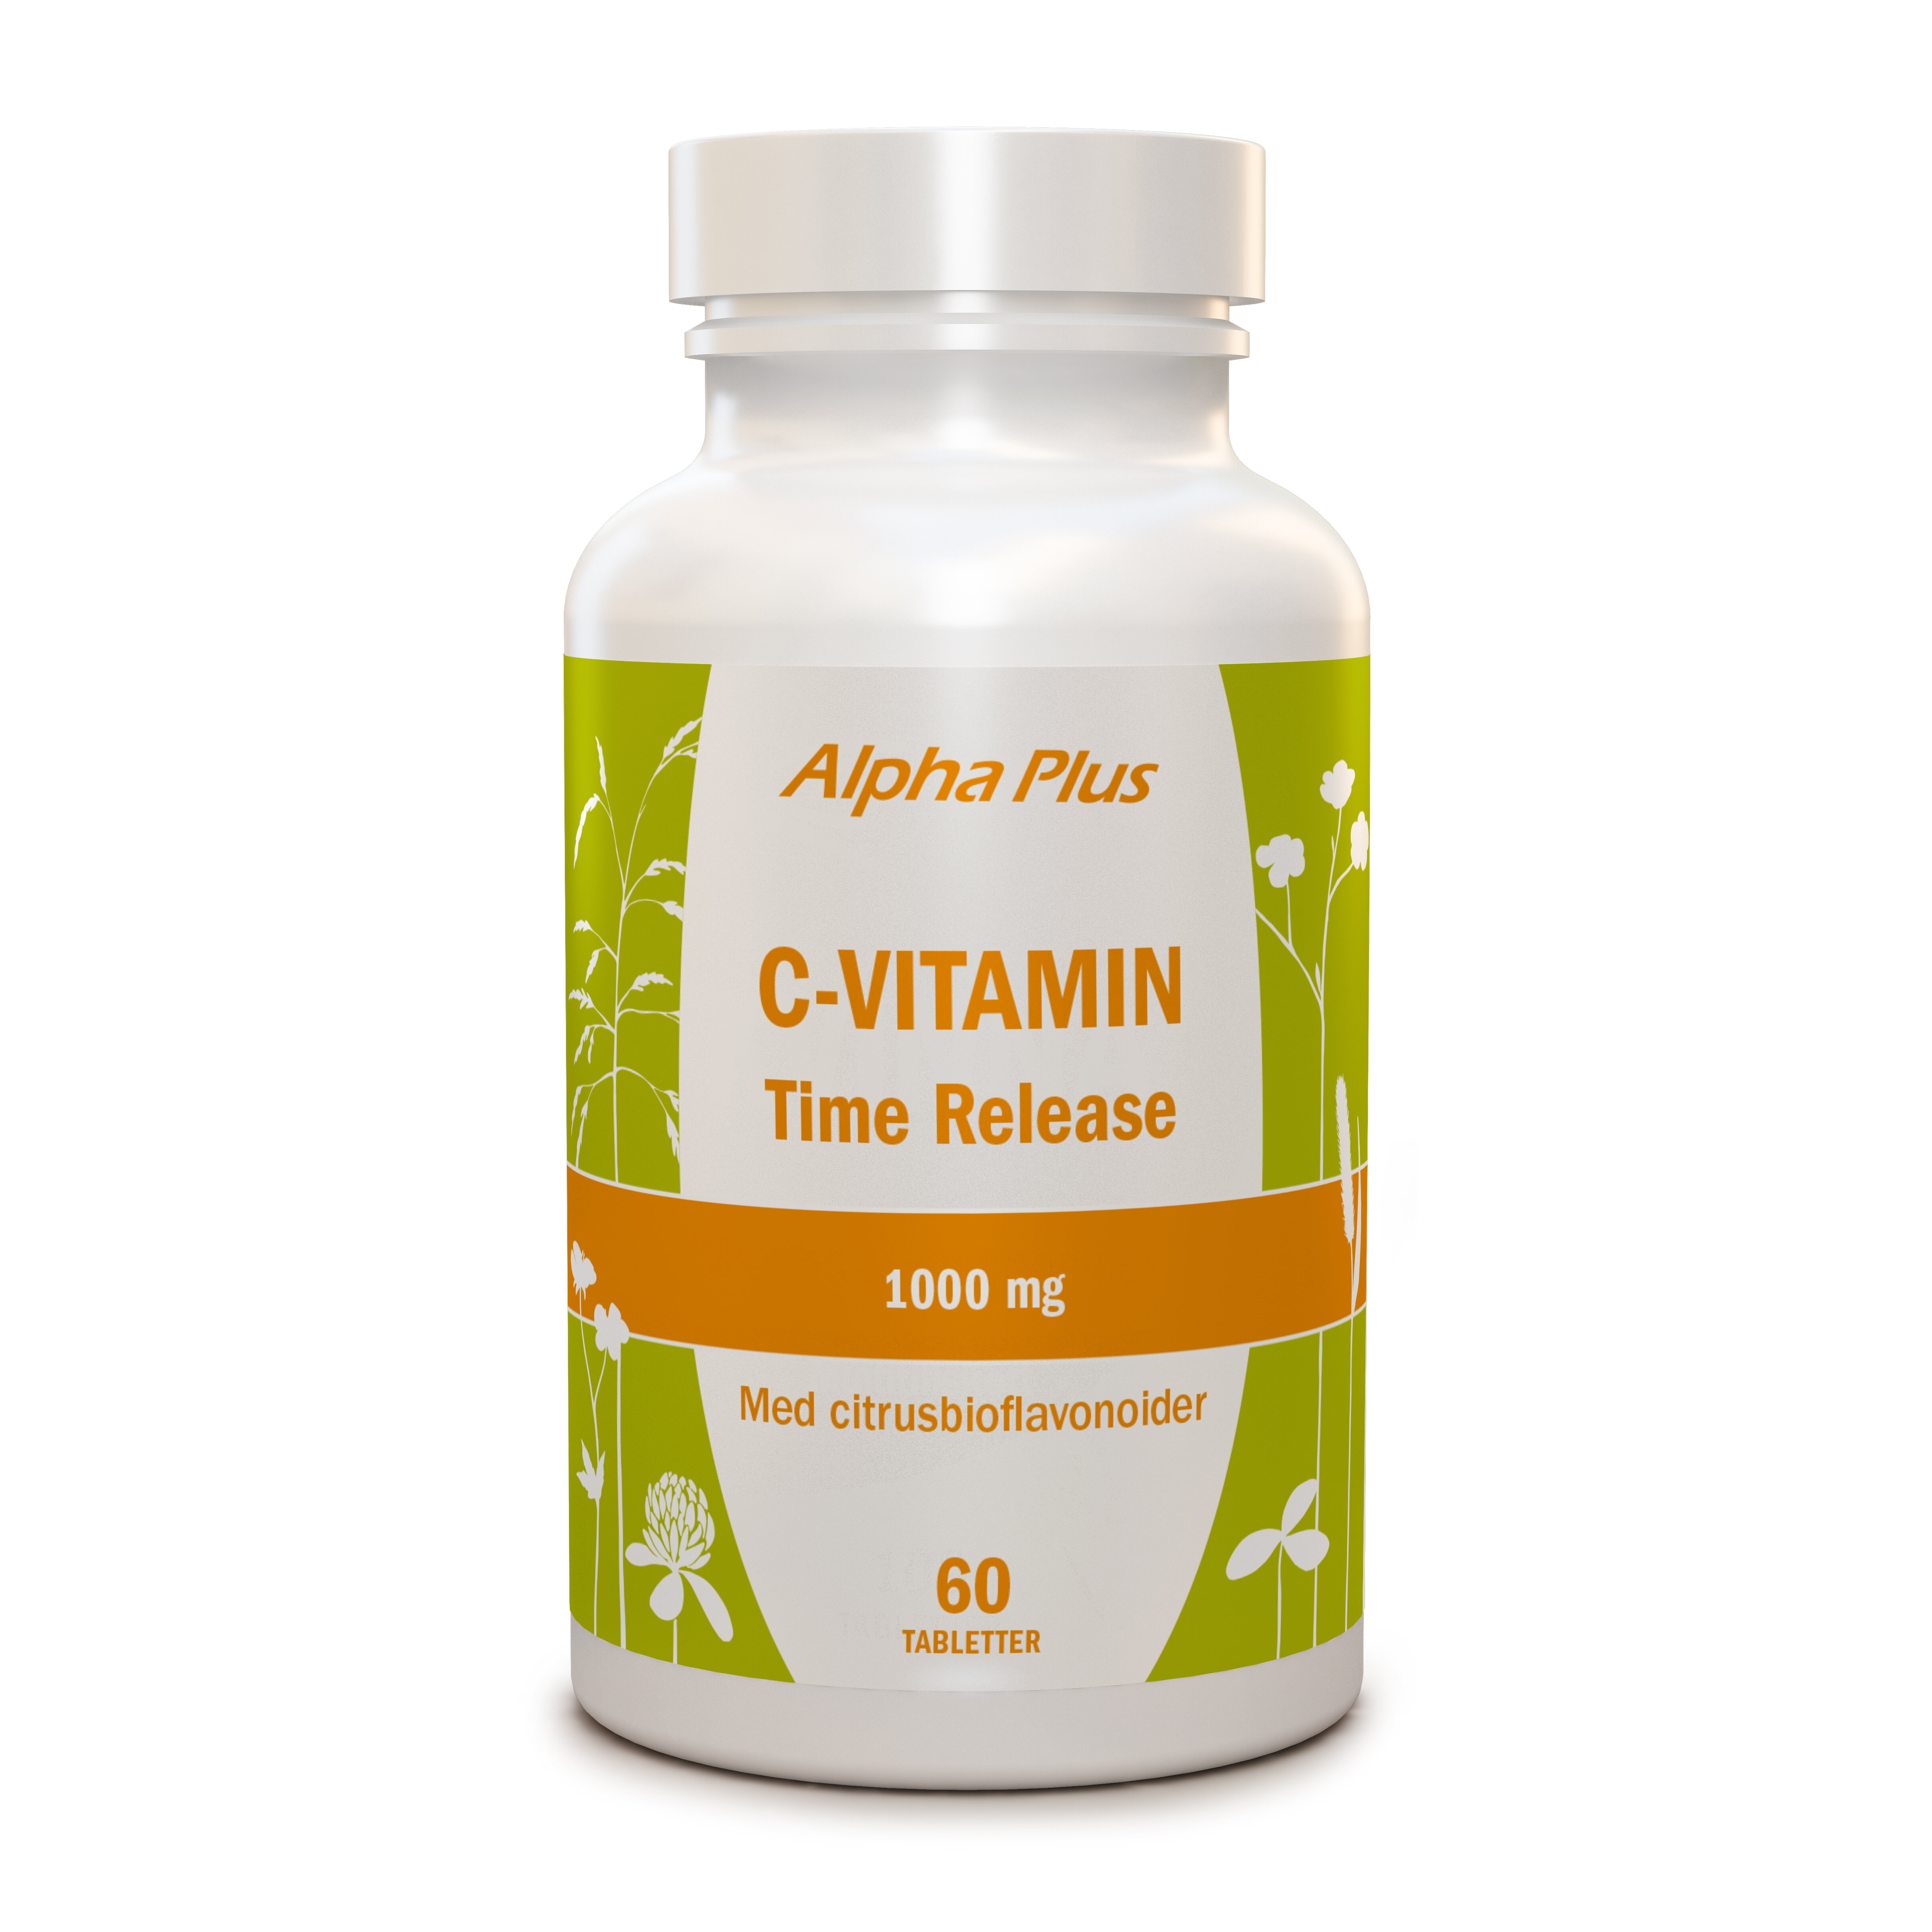 C-vitamin Time Release 1000 mg 60 tabletter